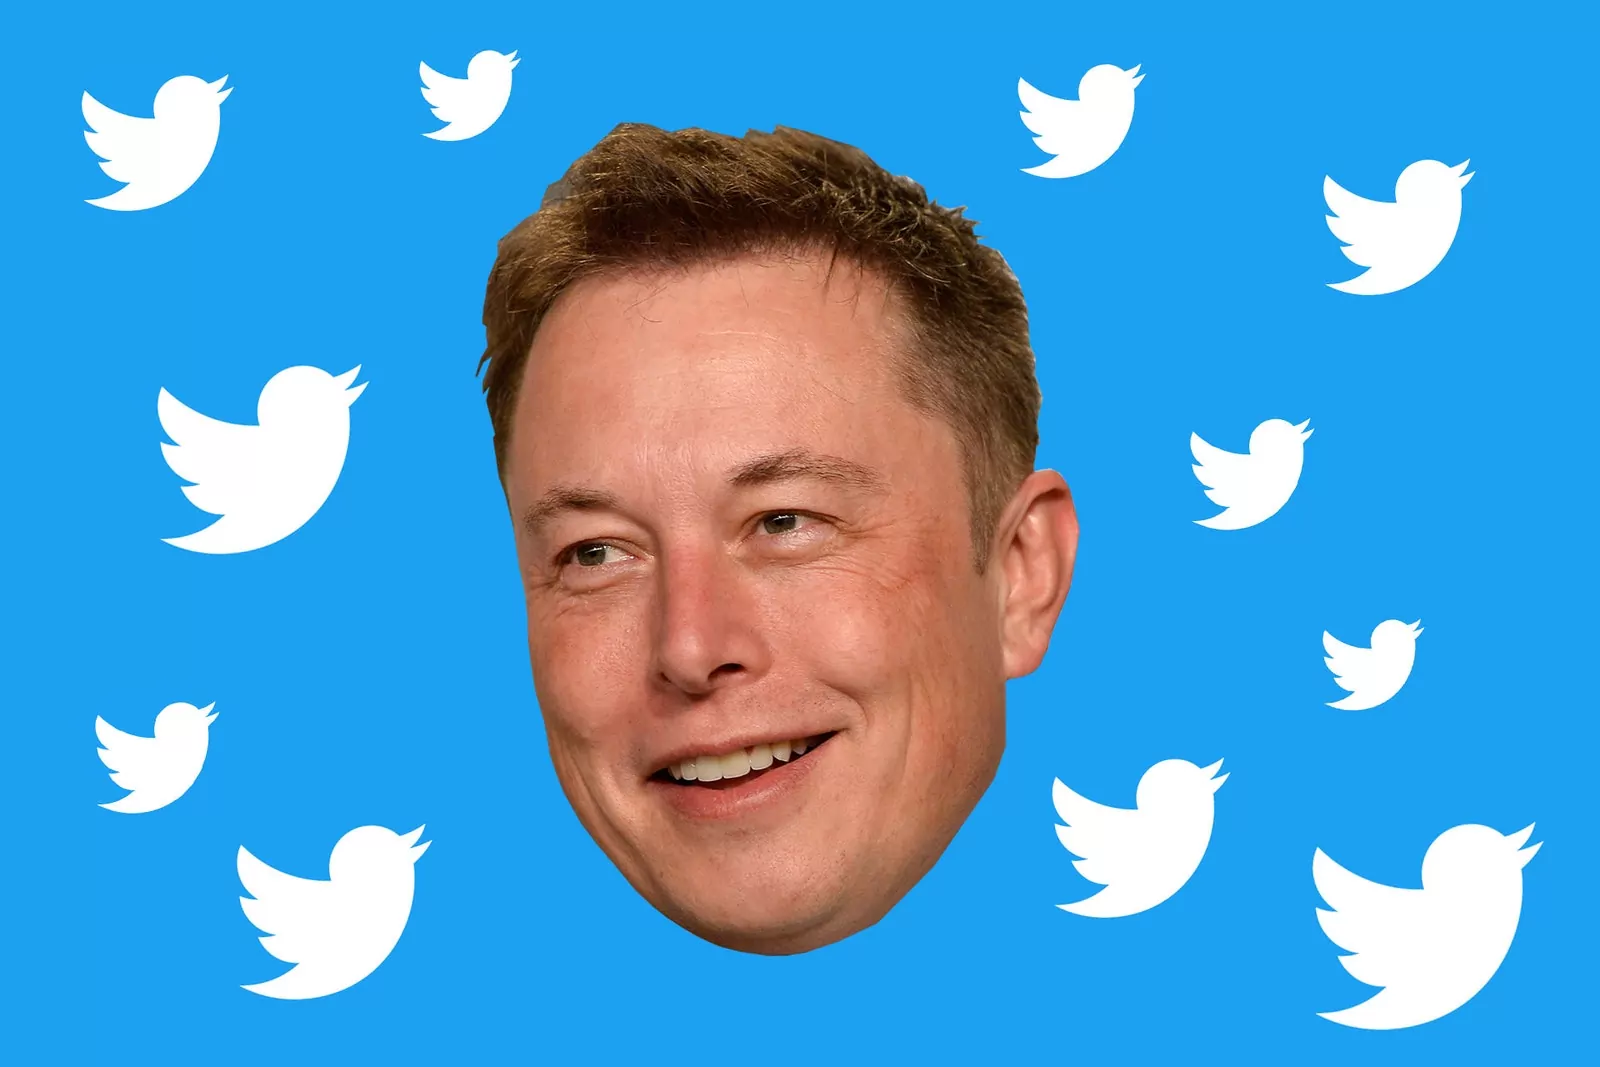 Twitter Announces Elon Musk To Join Board Of Directors | Why?